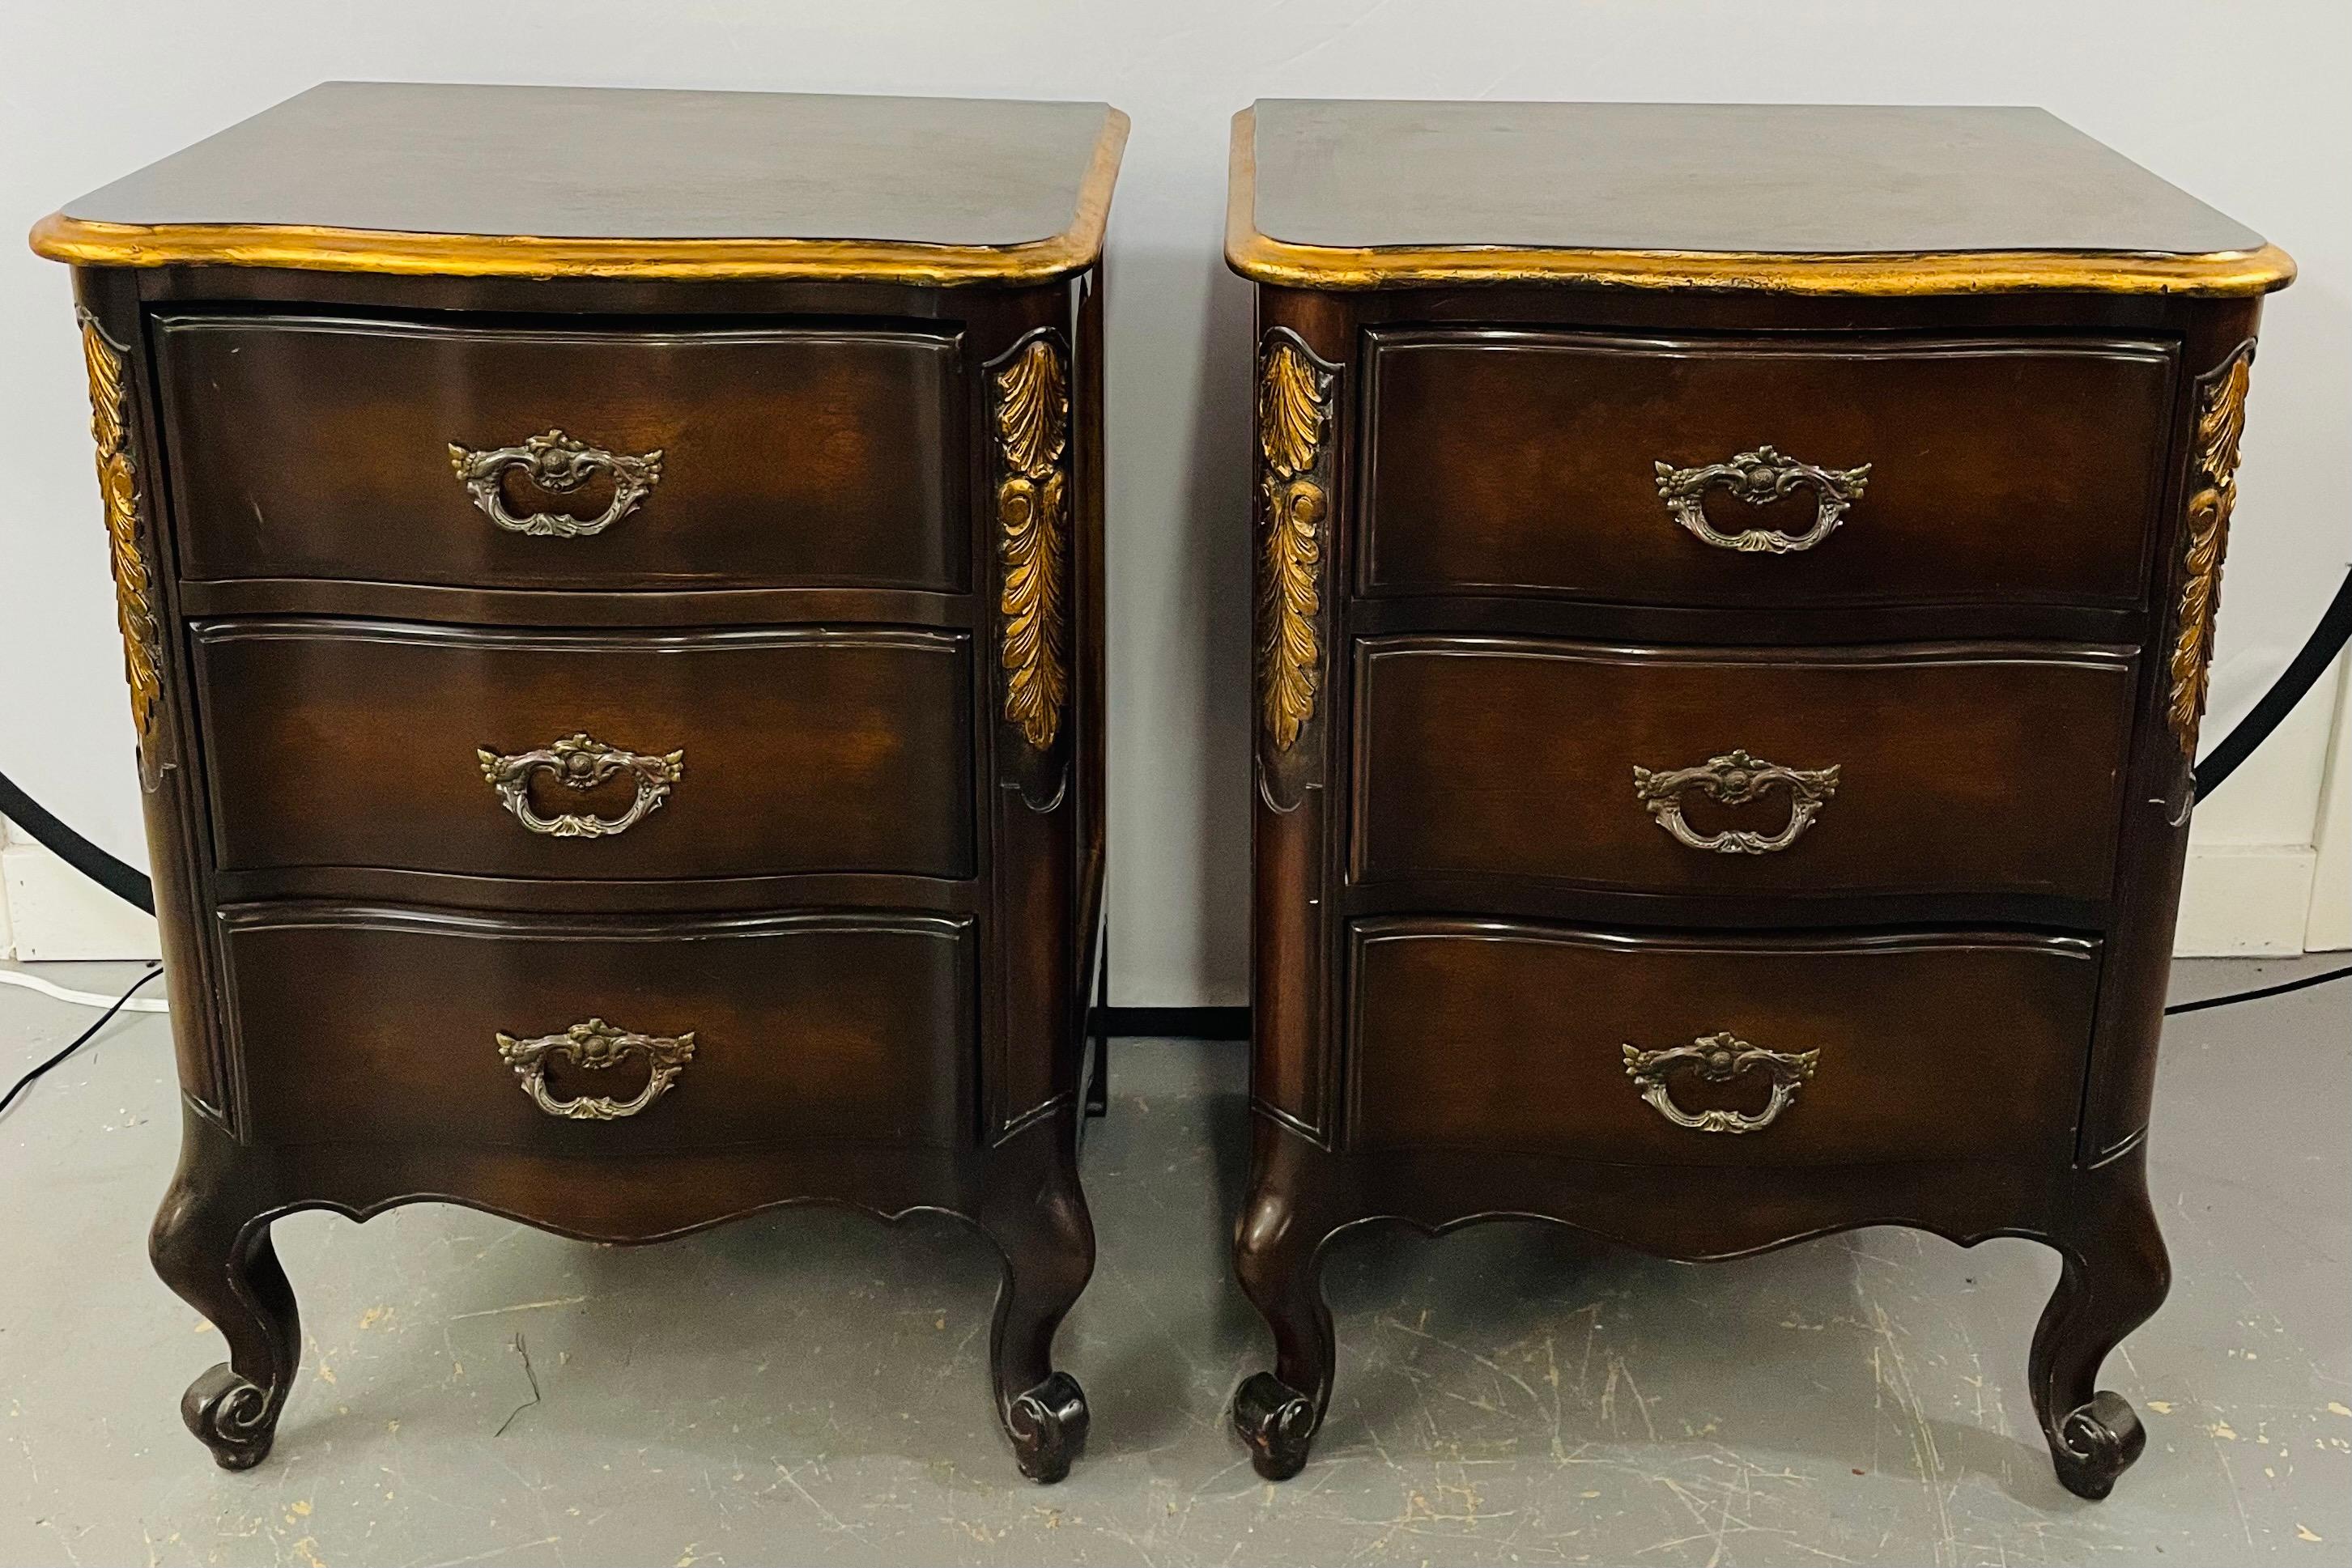 An early 20th century pair of French provincial / Country nightstands finely hand carved in solid Mahogany and showing a beautiful curve and acanthus design gilt decorated. Each nightstand features three drawers and original pulls. The timeless